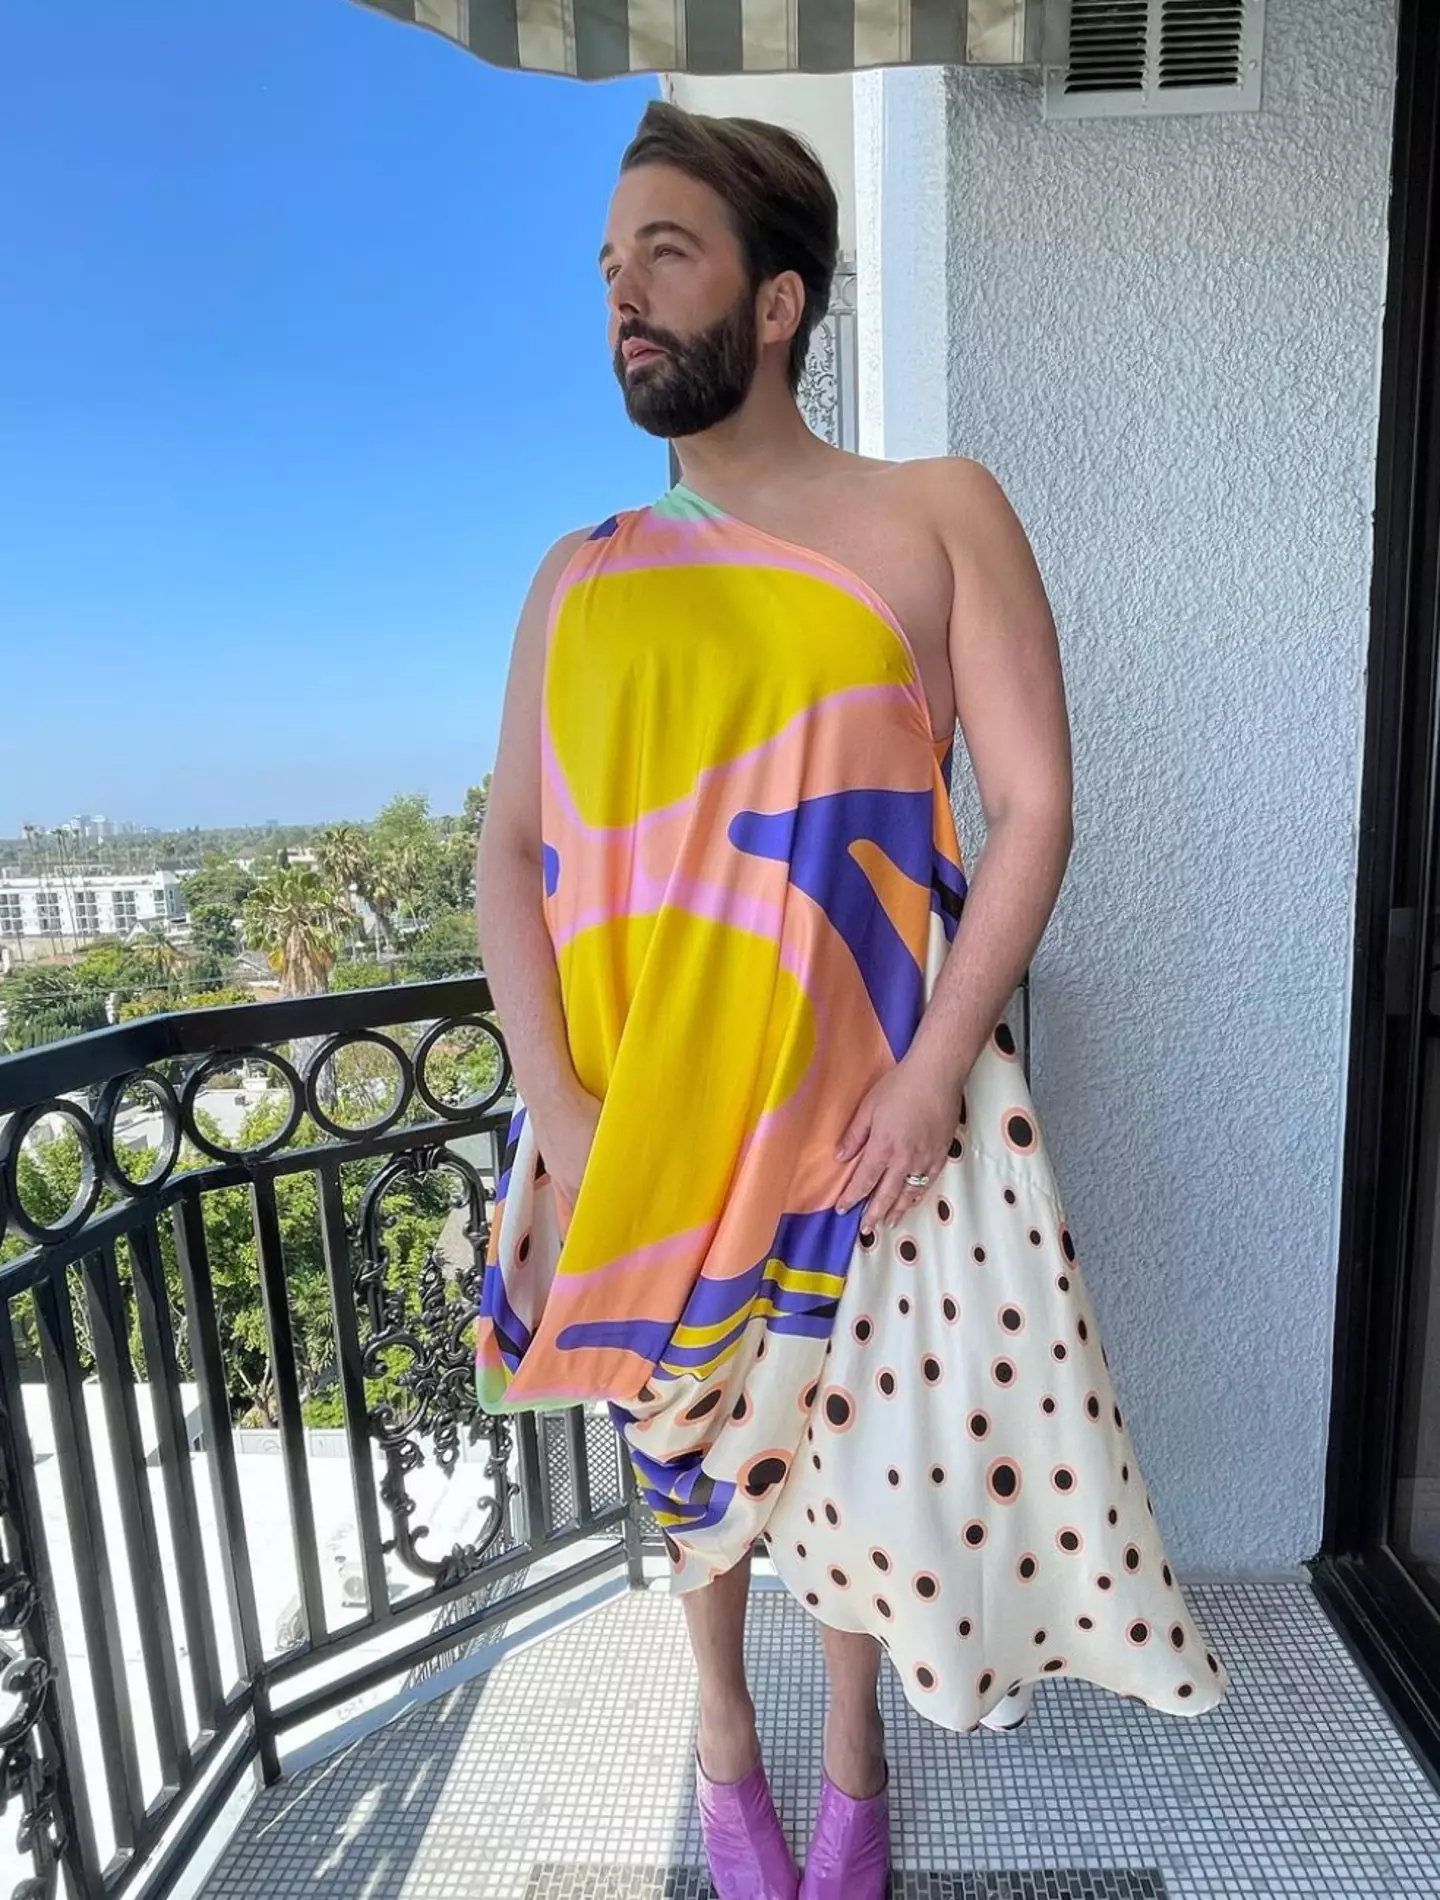 Jonathan Van Ness is known for often wearing - and absolutely rocking - dresses and skirts.